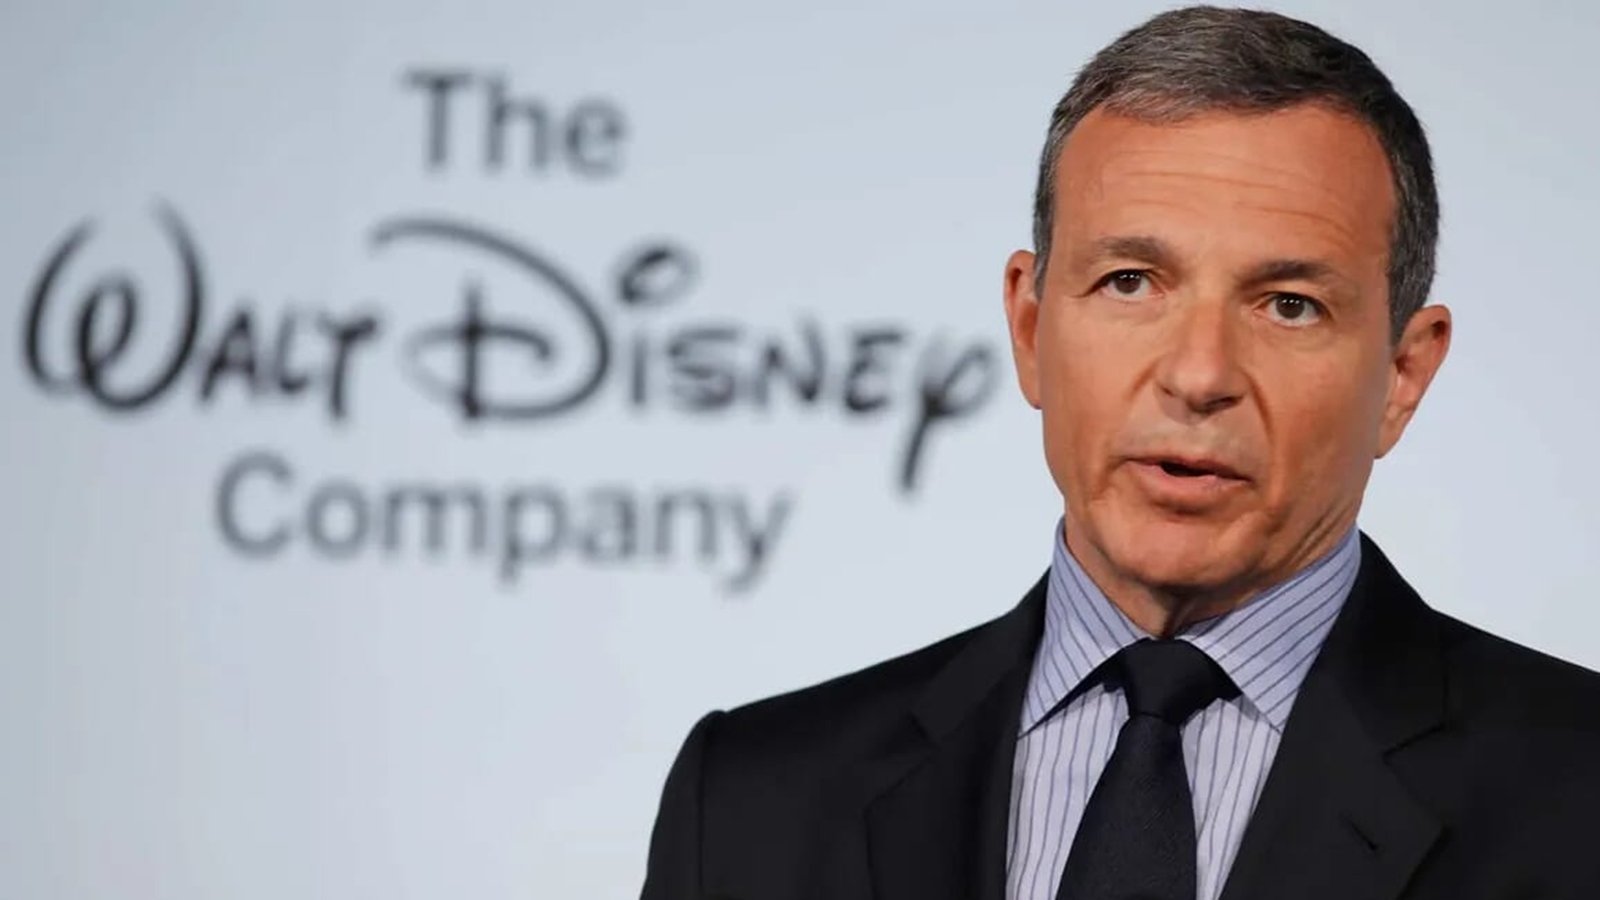 Bob Iger extends his agreement: he will remain at the helm of Disney until 2026